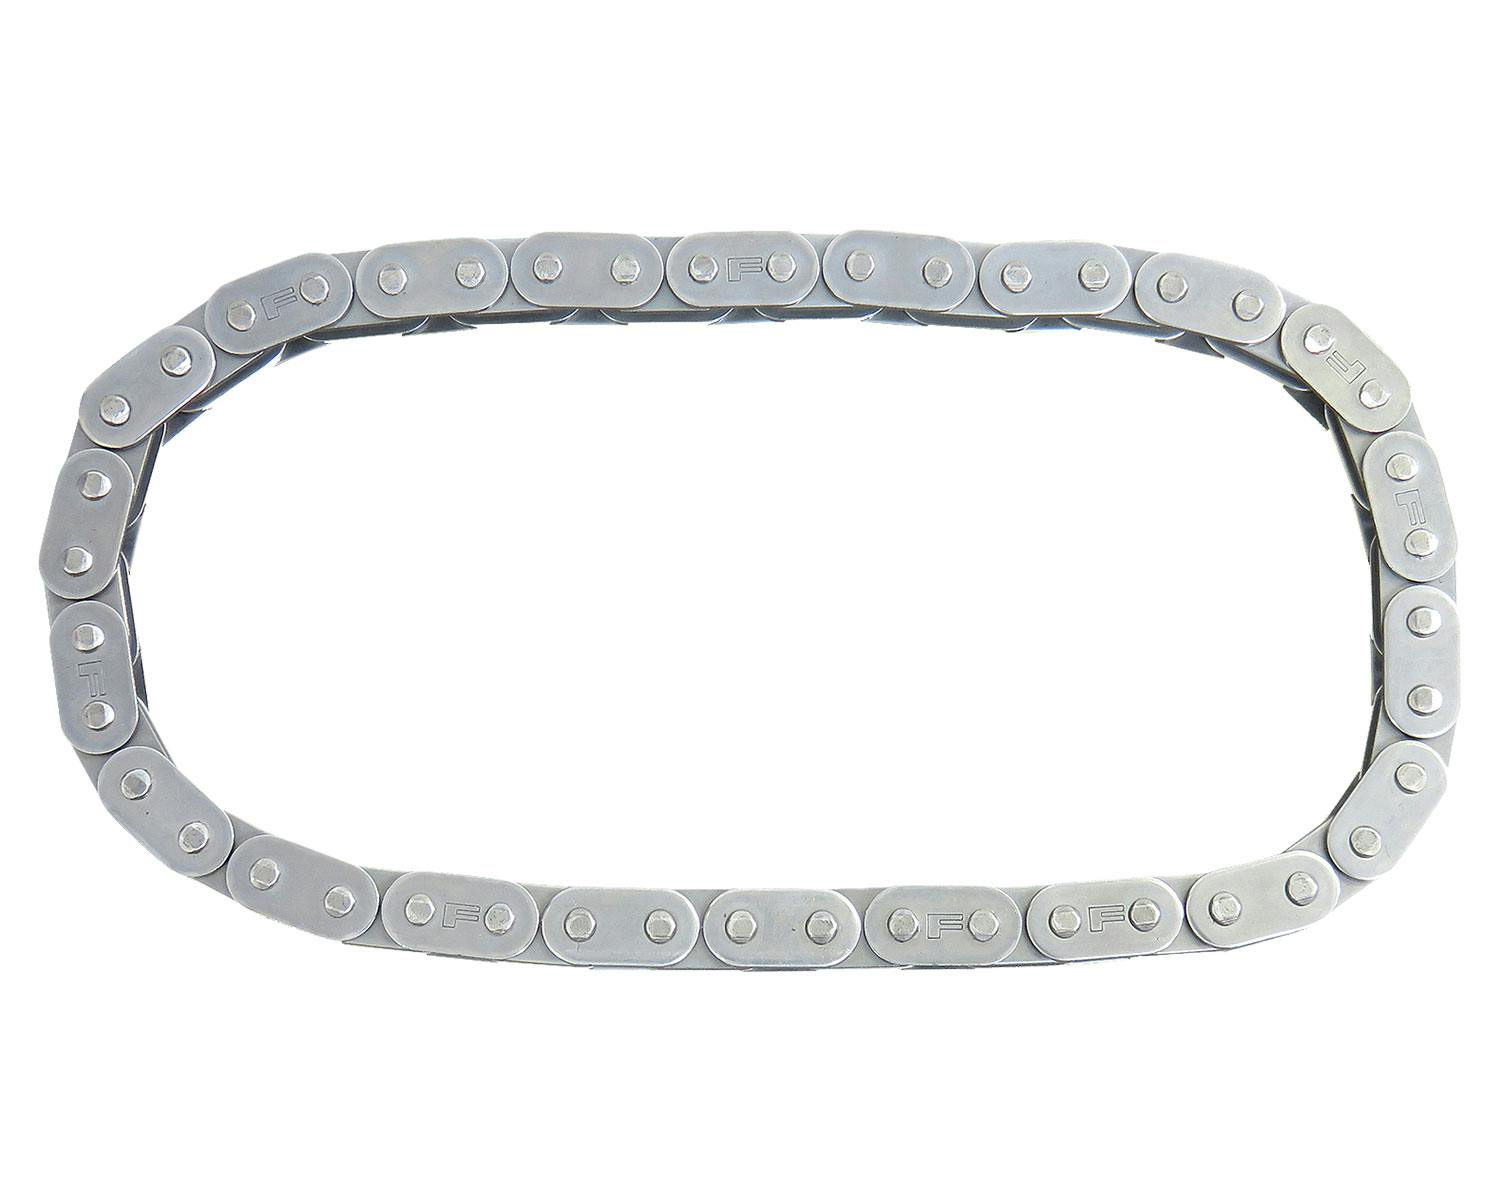 22 Link 8061 Feuling Outer Roller Chain